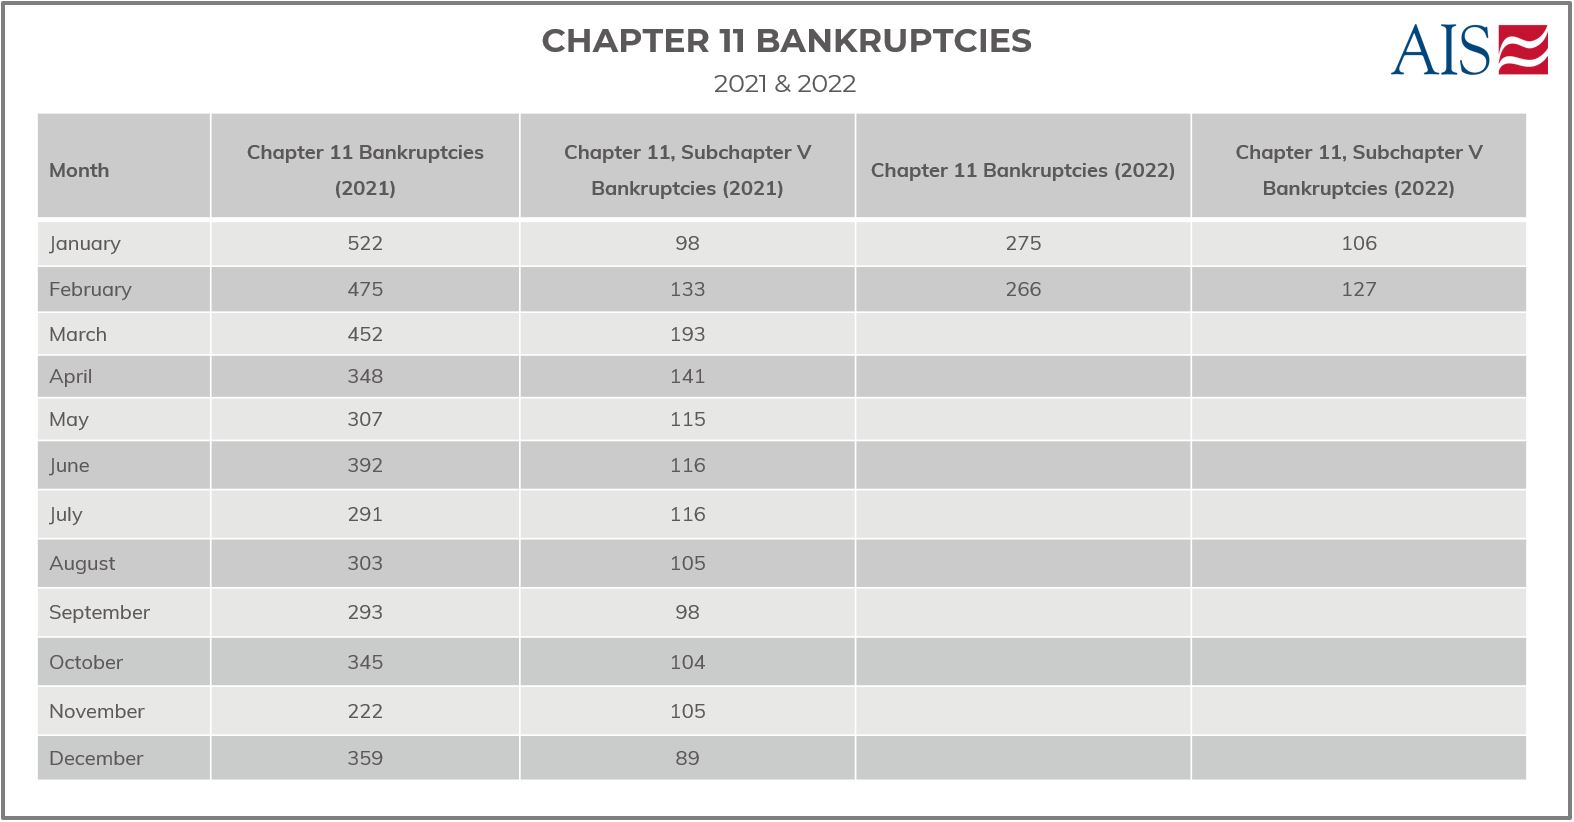 AIS Insight_February 2022_CHAPTER 11 BANKRUPTCIES (TABLE)-1-1